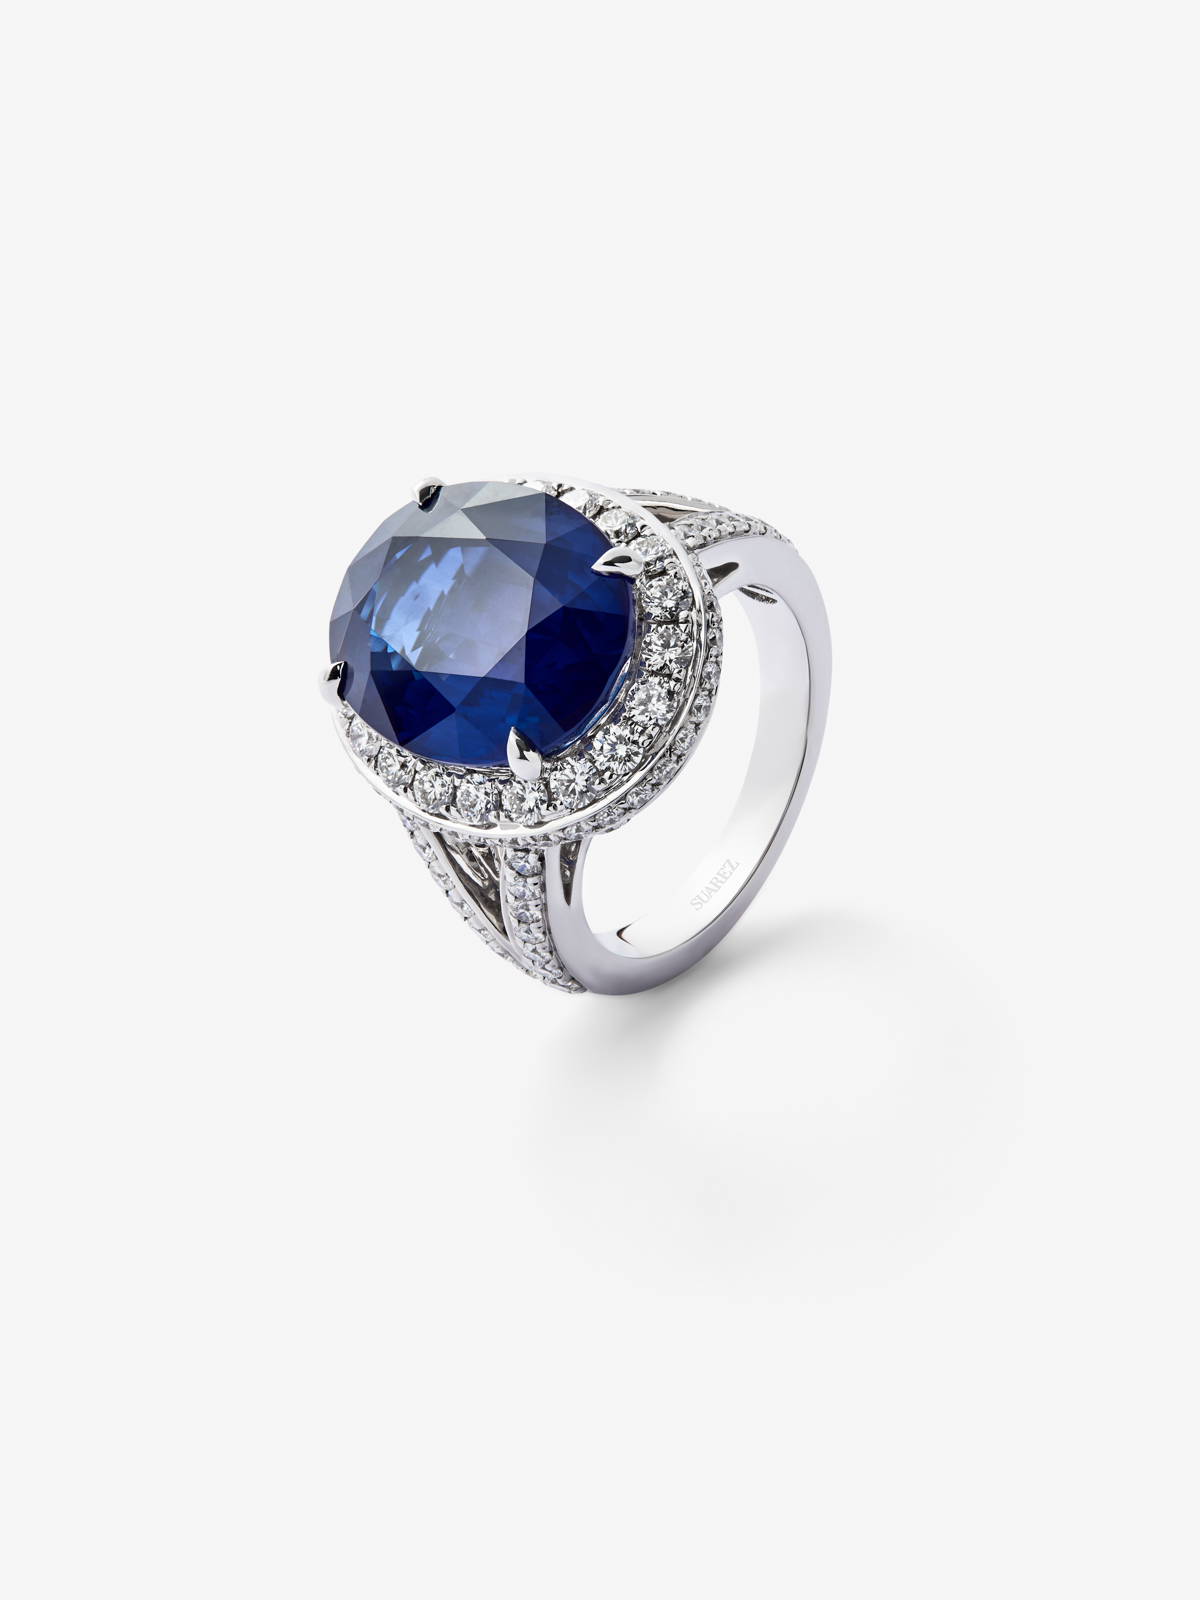 18kt White Gold Ring with 12.64cts and Diamond Royal Blue Oval Zafiro